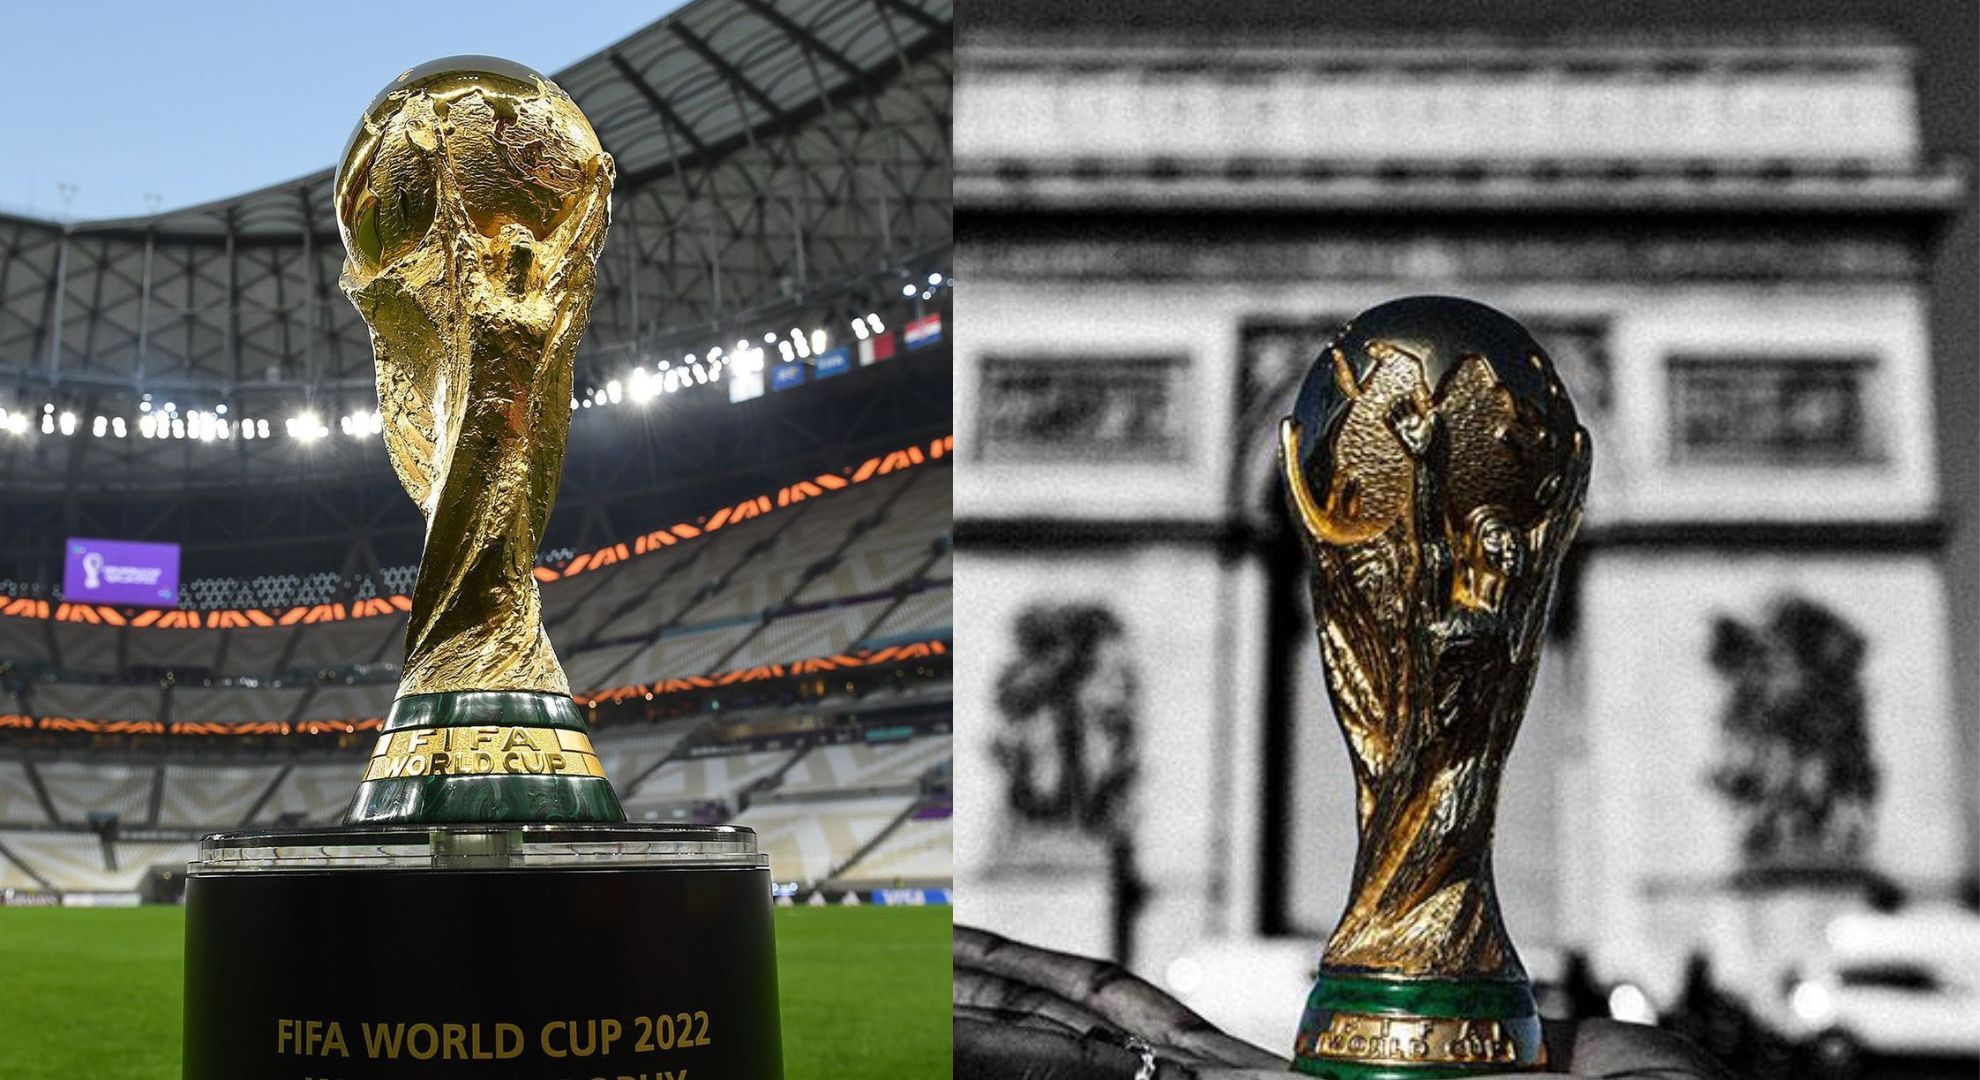 Solid gold FIFA World Cup Trophy is a pricey possesion